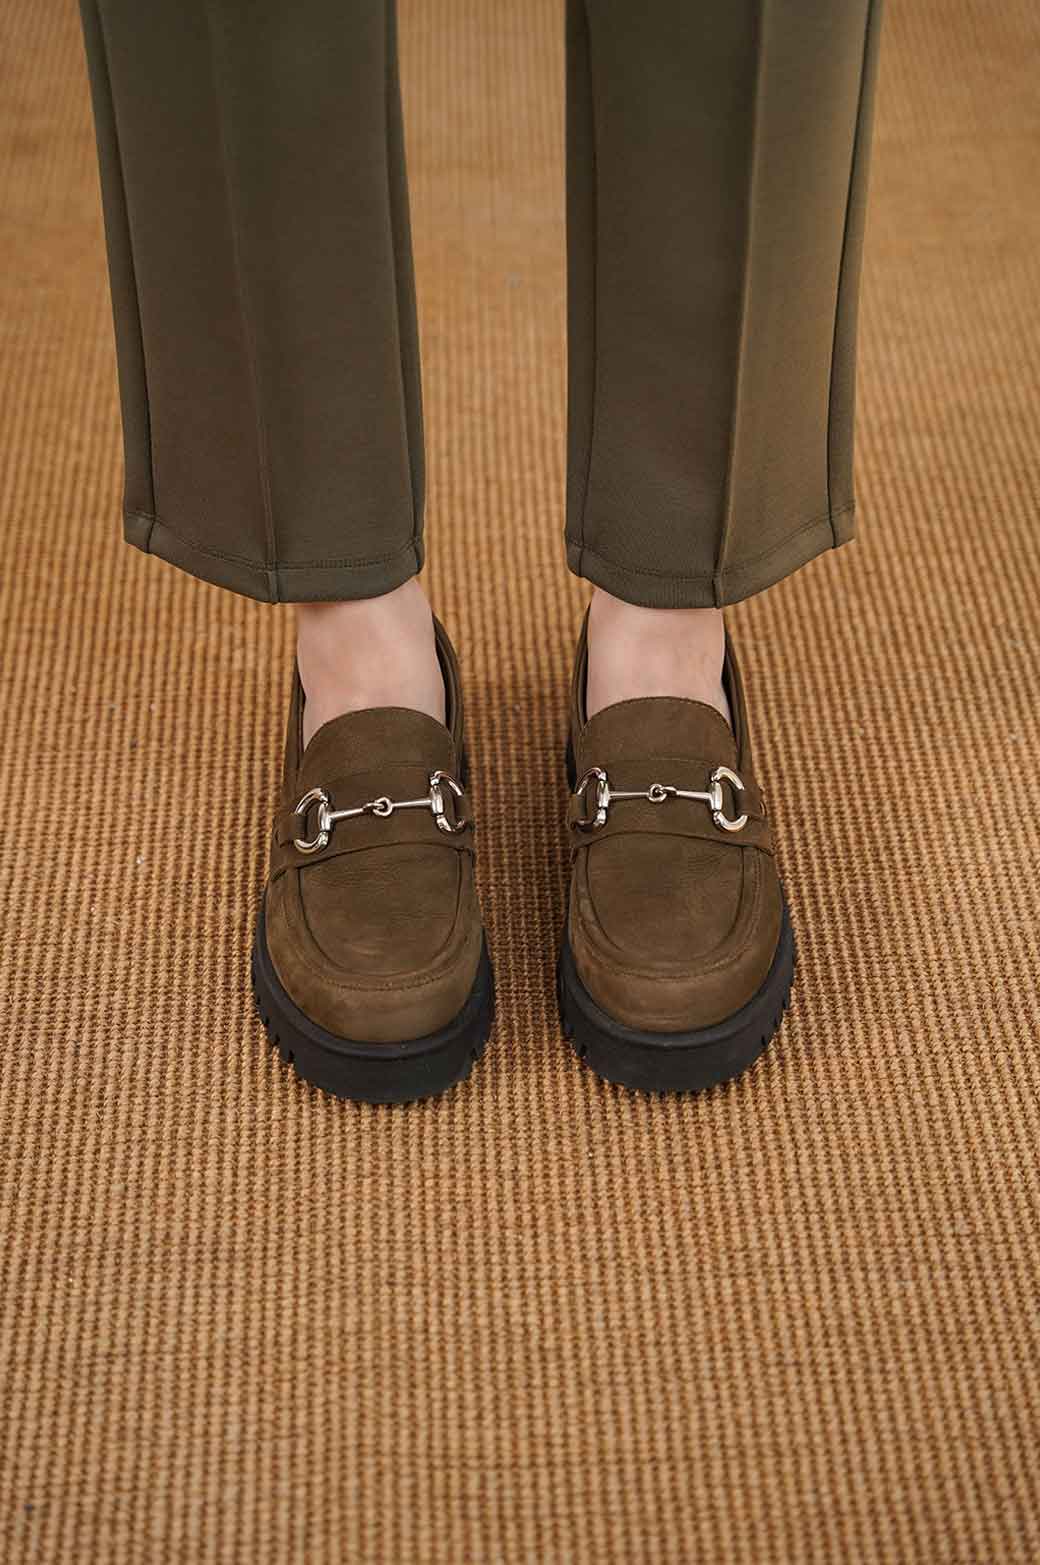 OLIVE BUCKLED LOAFERS